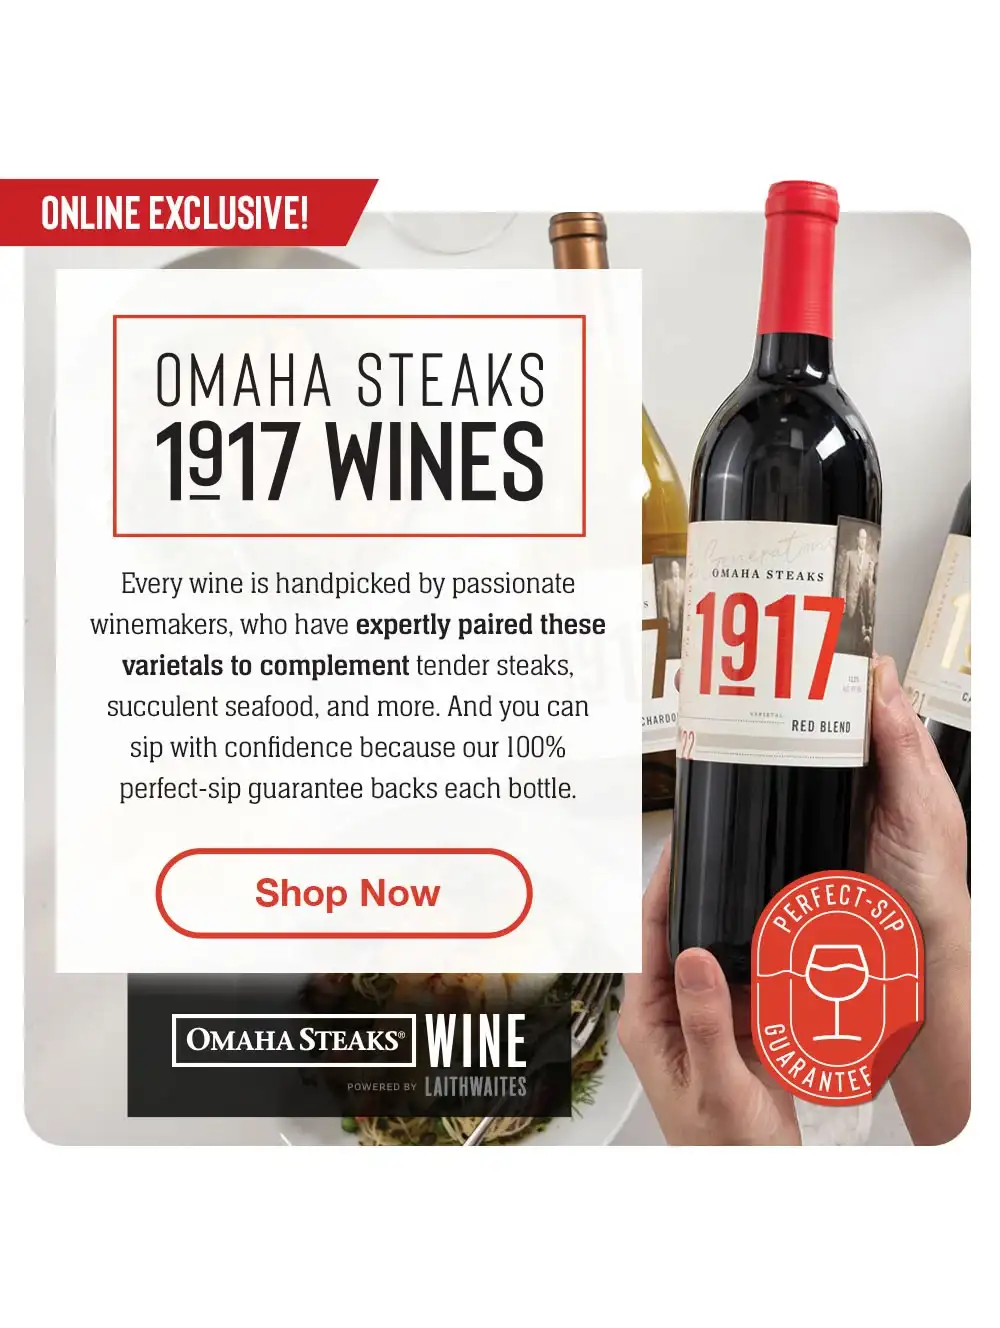 INTRODUCING - OMAHA STEAKS 1917 WINES | Omaha Steaks Wine is here! Enjoy an exciting collaboration bringing you the world's most thrilling and handpicked wines. Our perfect-sip guarantee backs each bottle. || Shop Now || OMAHA STEAKS® WINE POWERED BY LAITHWAITES | Perfect-Sip Guarantee